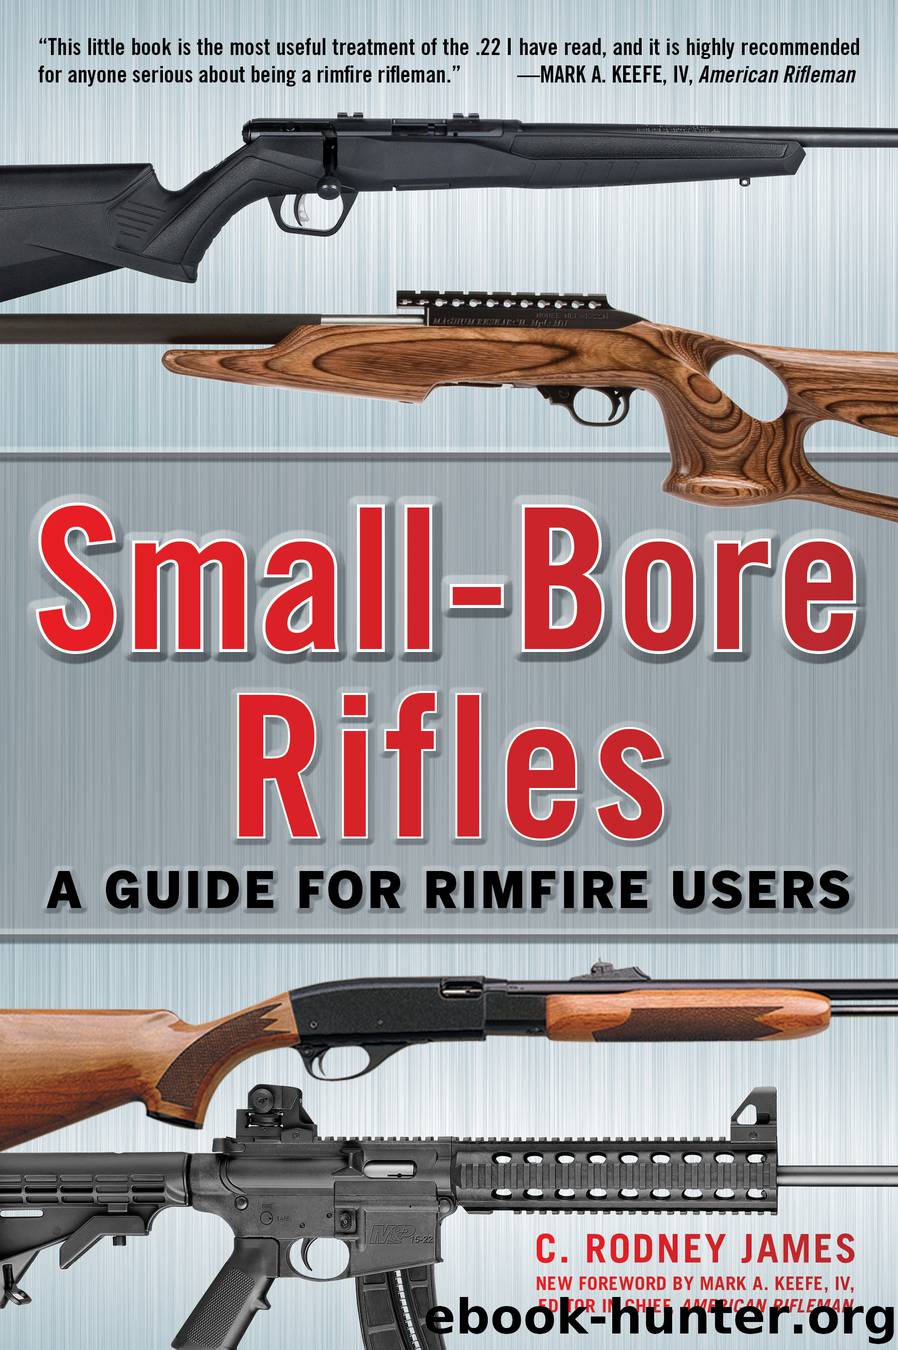 Small-Bore Rifles by C. Rodney James